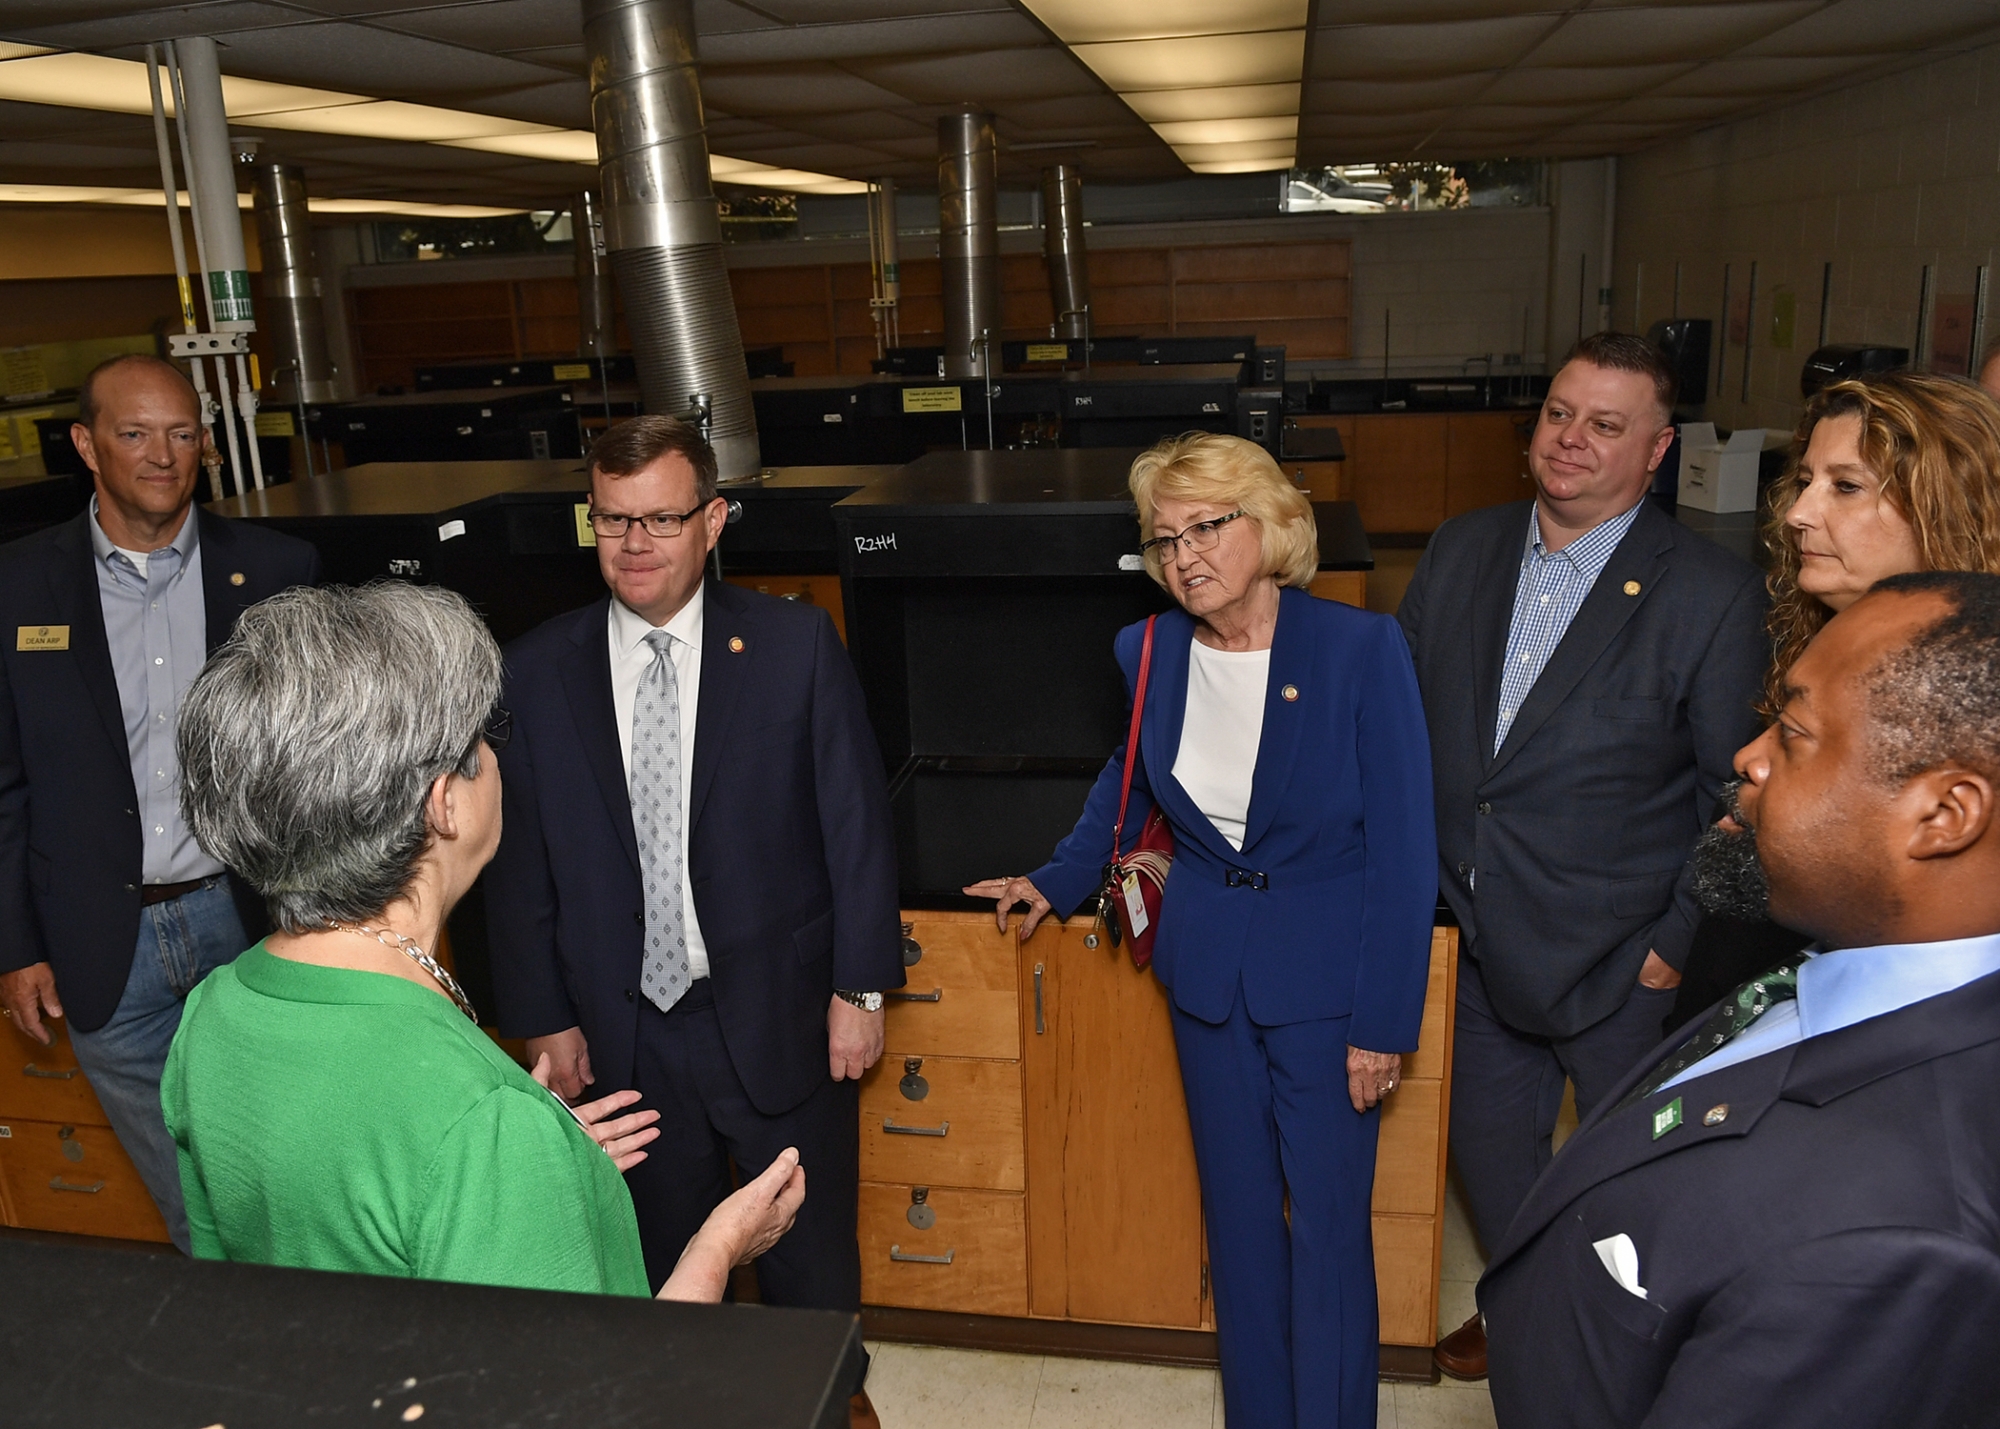  Provost Joan Lorden discusses pending renovations to the Burson and Cameron science buildings with North Carolina Representatives Dean Arp ’99, House Speaker Tim Moore, Linda Johnson, Jason Saine ’95, Chemistry Chair Bernadette Donovan-Merkert and UNC Charlotte Trustee Teross Young ’93